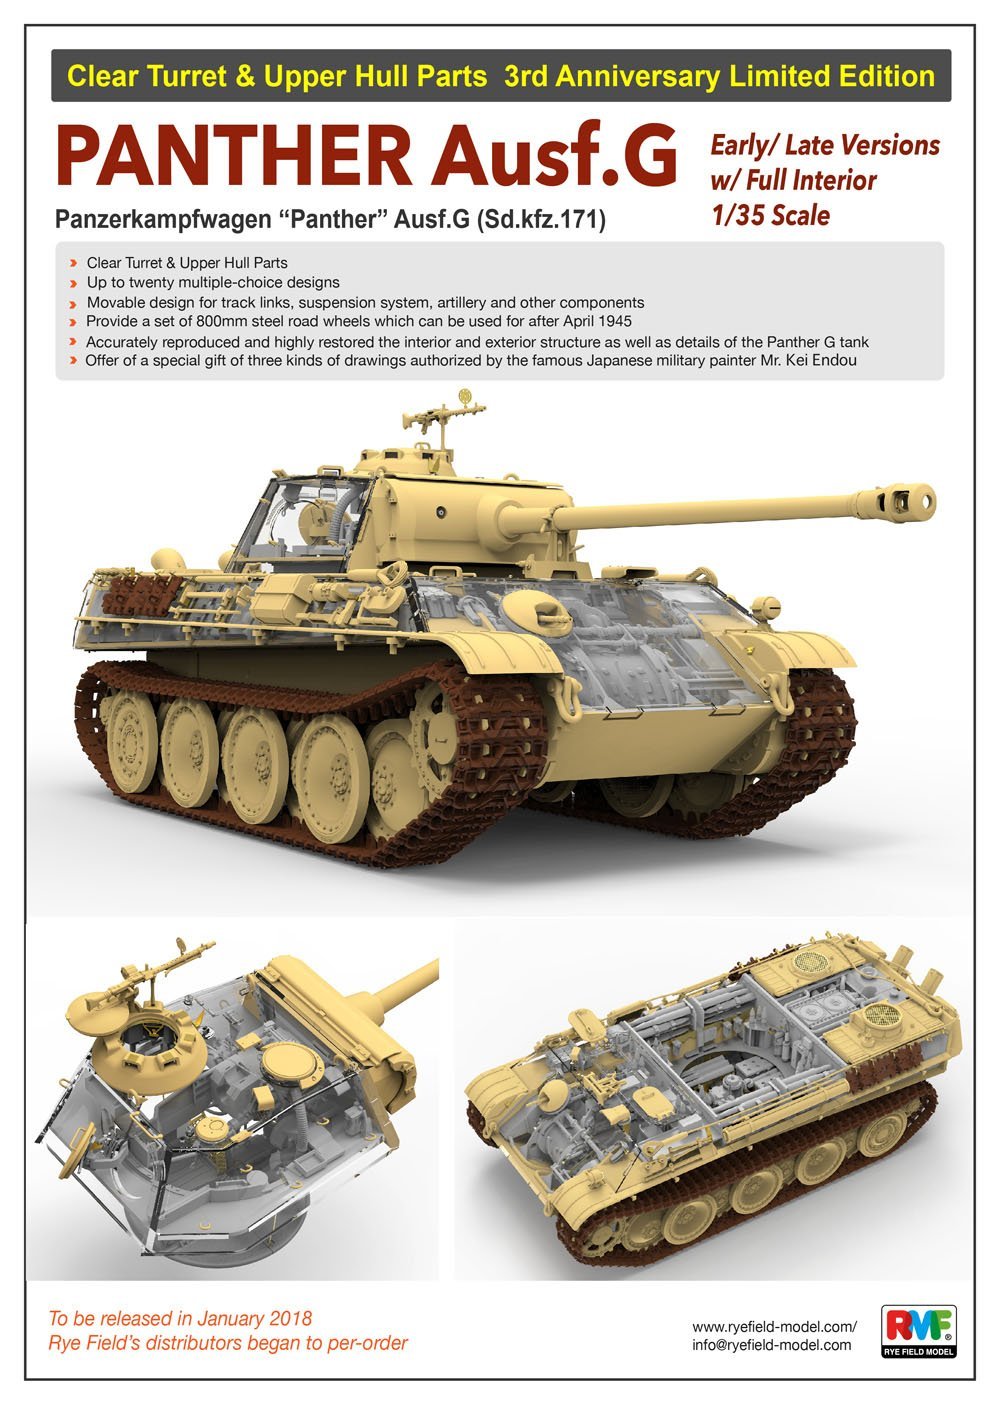 1/35 Panther Ausf.G w/Full Interior Limited Editiom - Click Image to Close